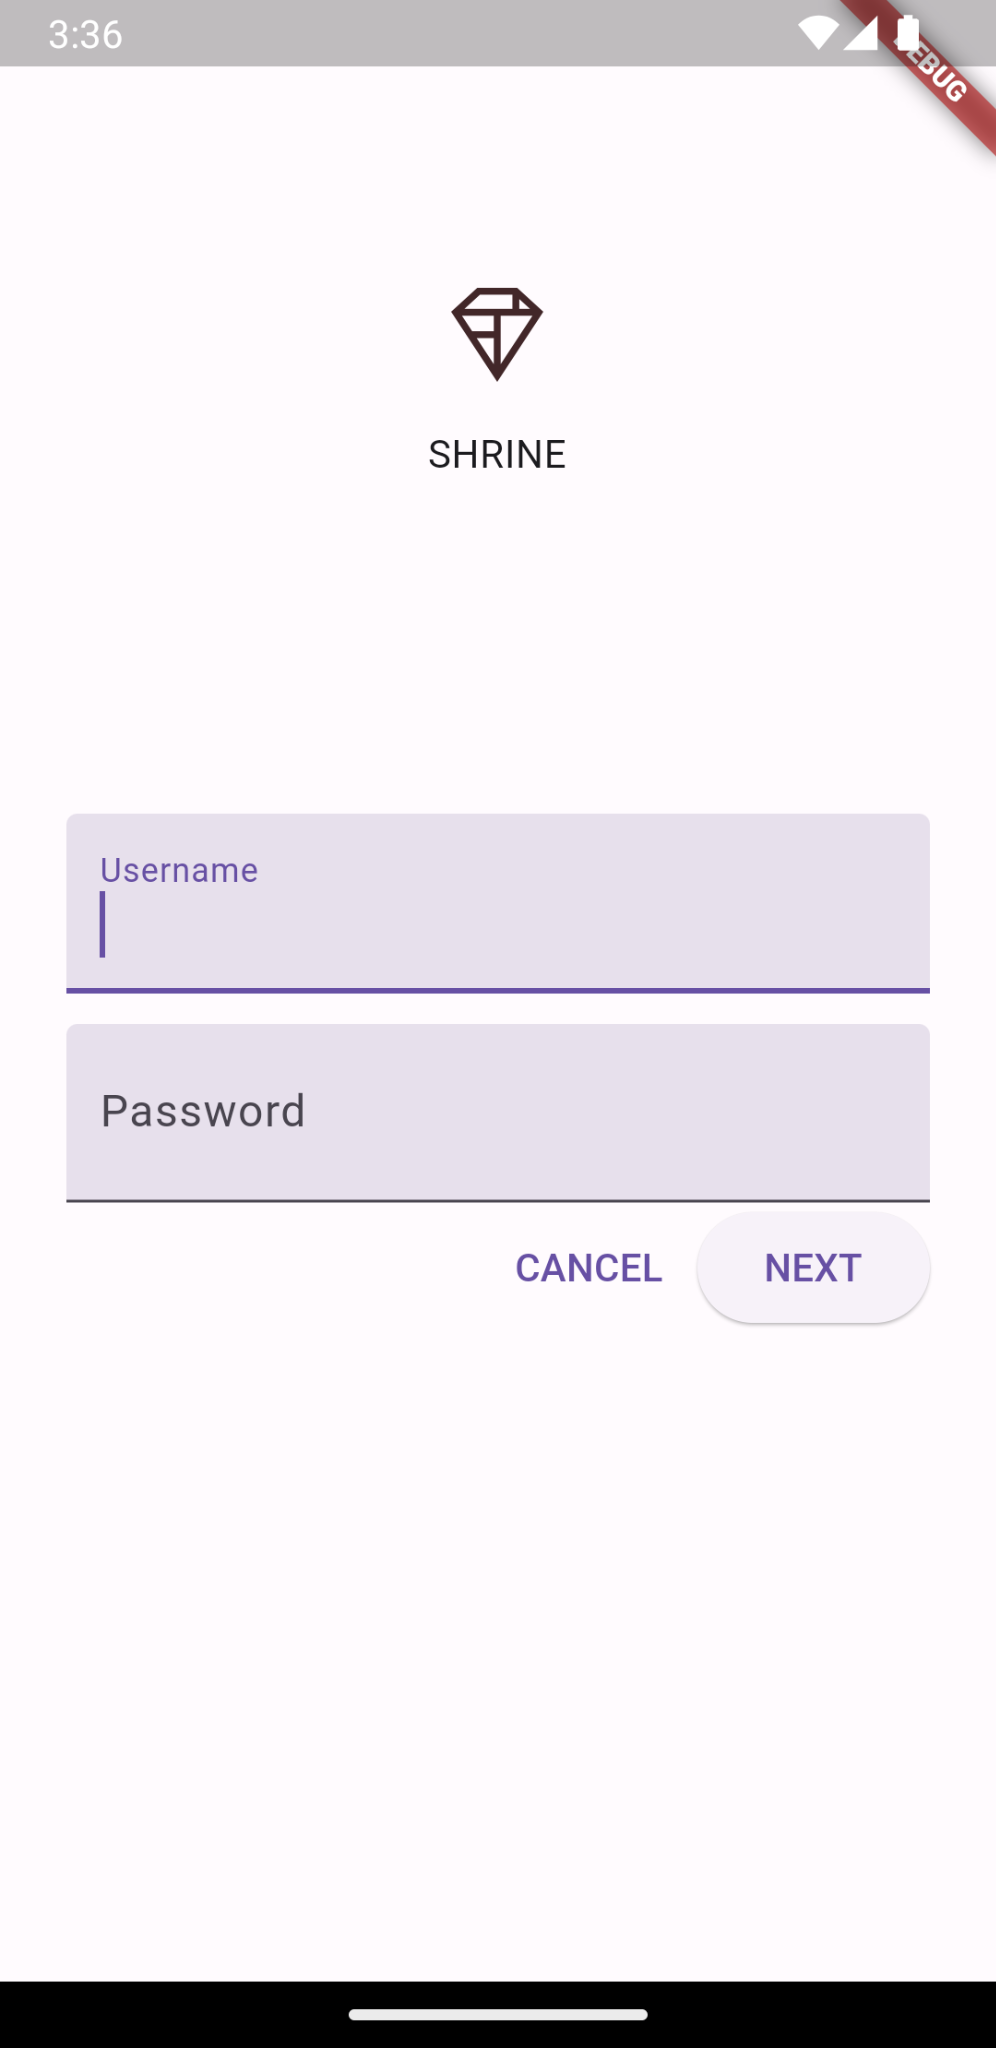 Shrine logo with username and password fields, cancel and next buttons